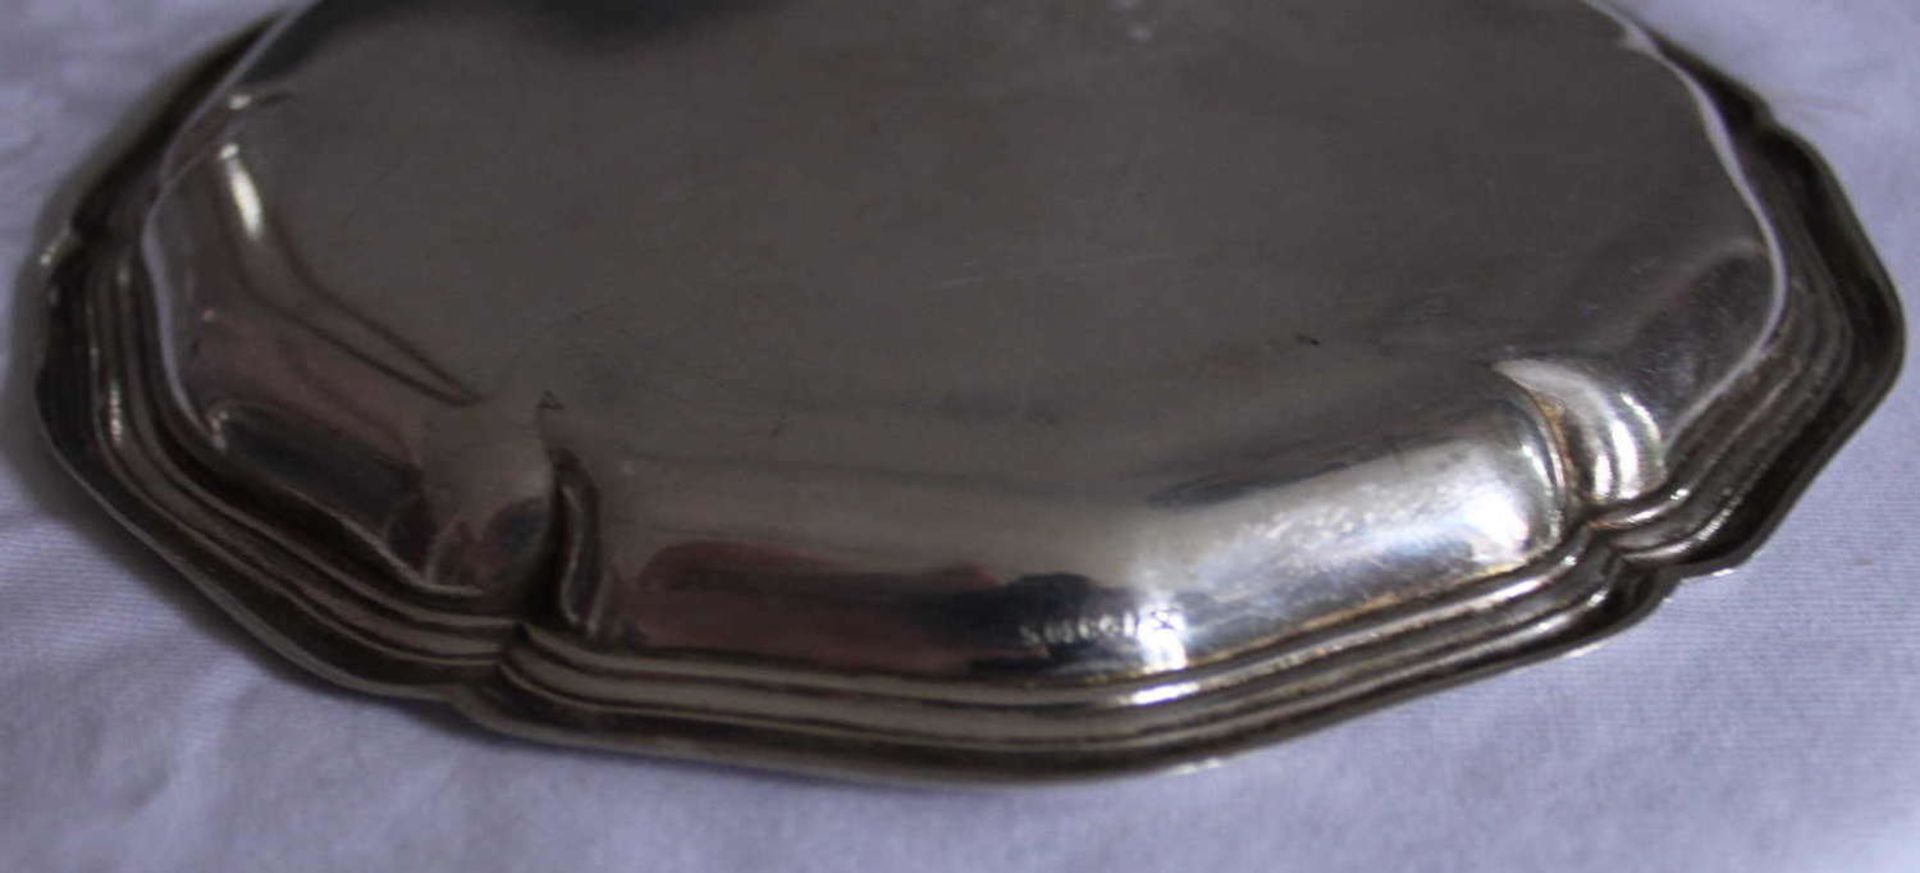 Small silver tray, 830 silver, diameter approx.15.7 cm. Weight approx. 104 gr. - Image 2 of 2